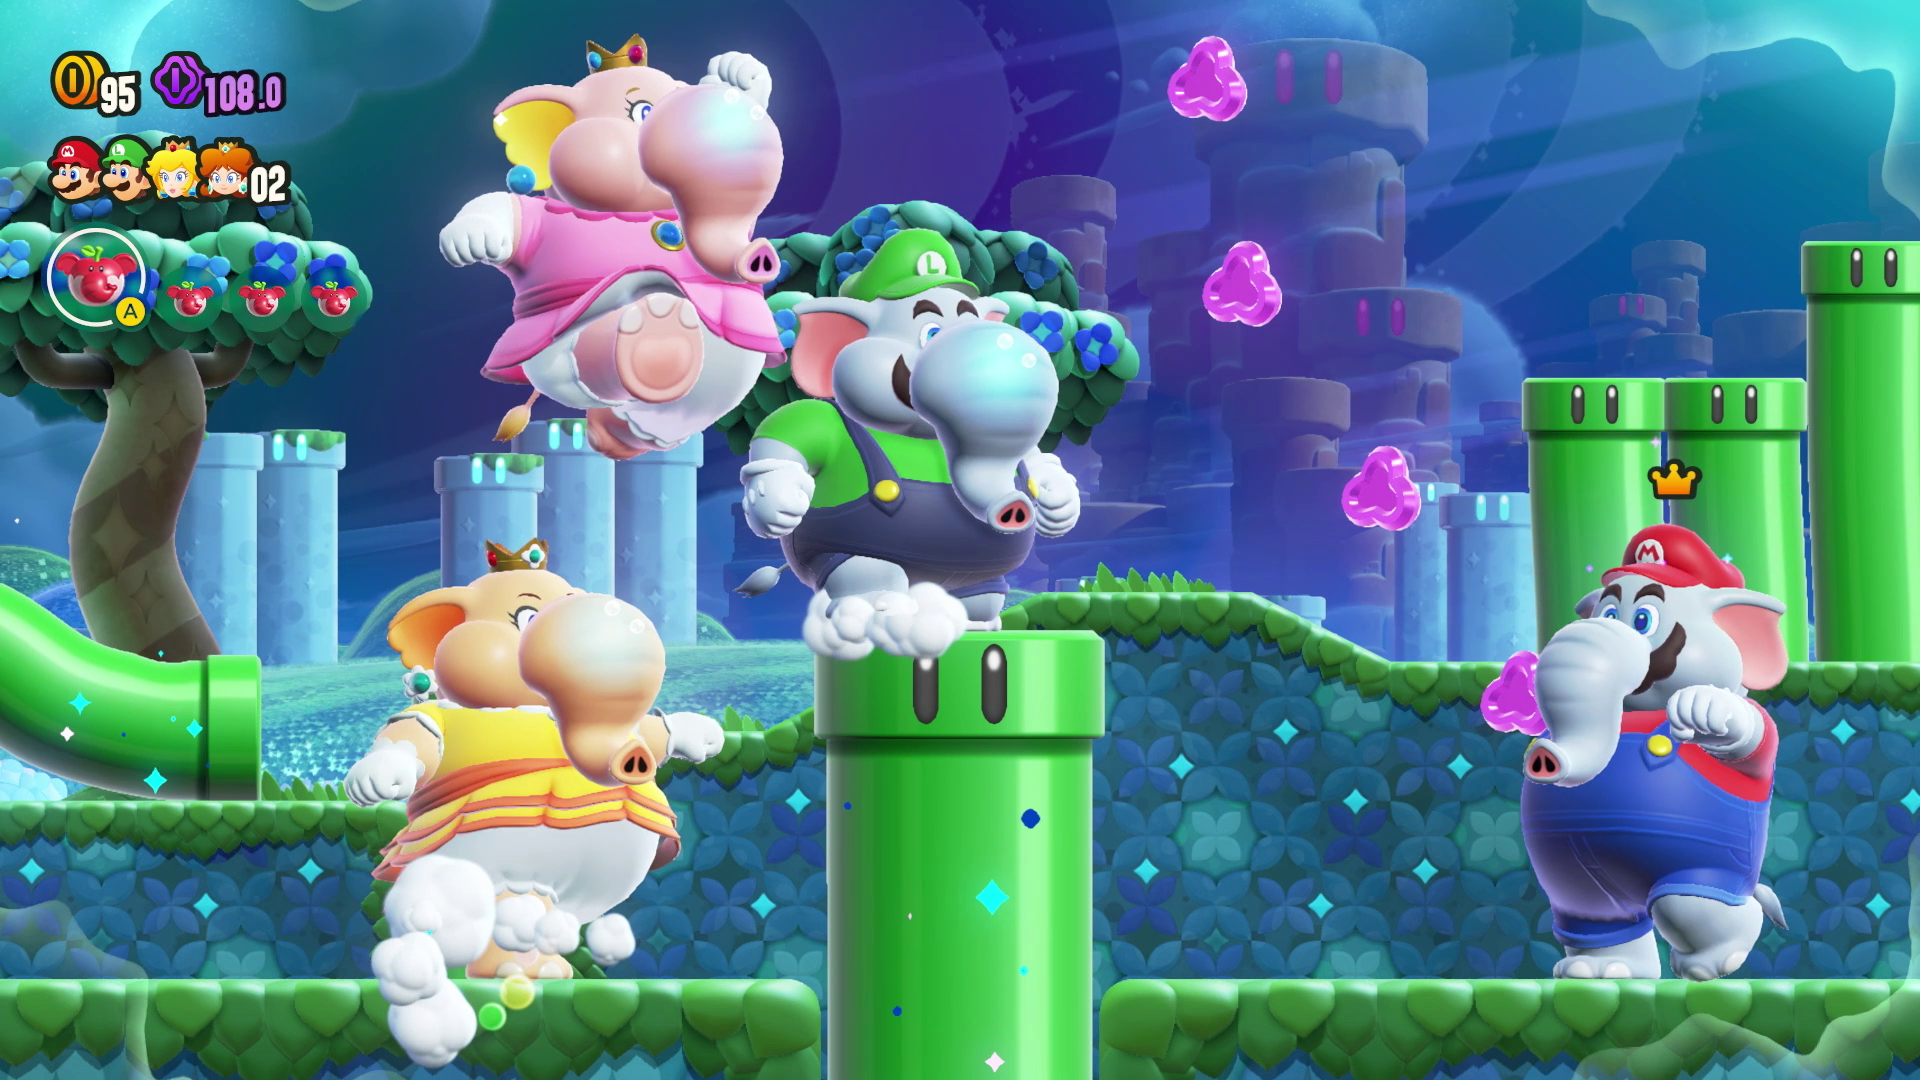 Video game screenshot of four Mario characters that have been transformed into elephants standing near a green pipe